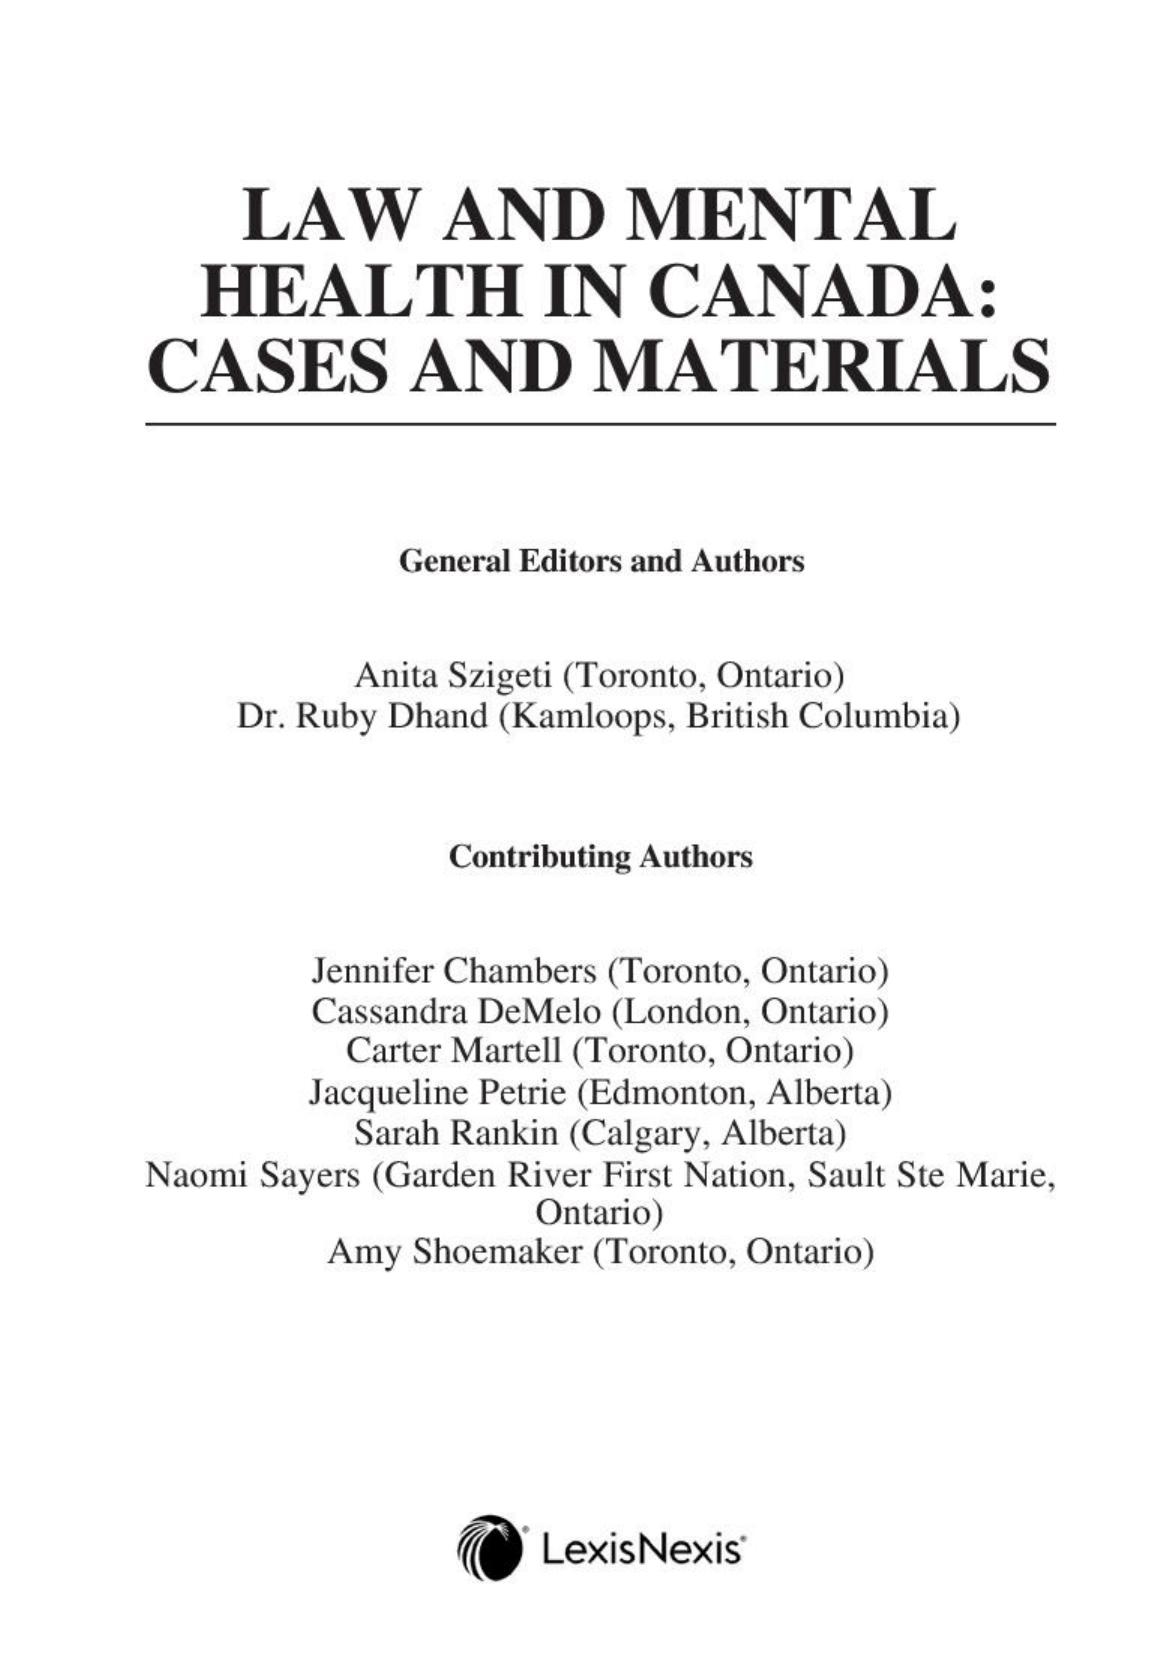 Law and Mental Health in Canada: Cases and Materials by Anita Szigeti Ruby Dhand